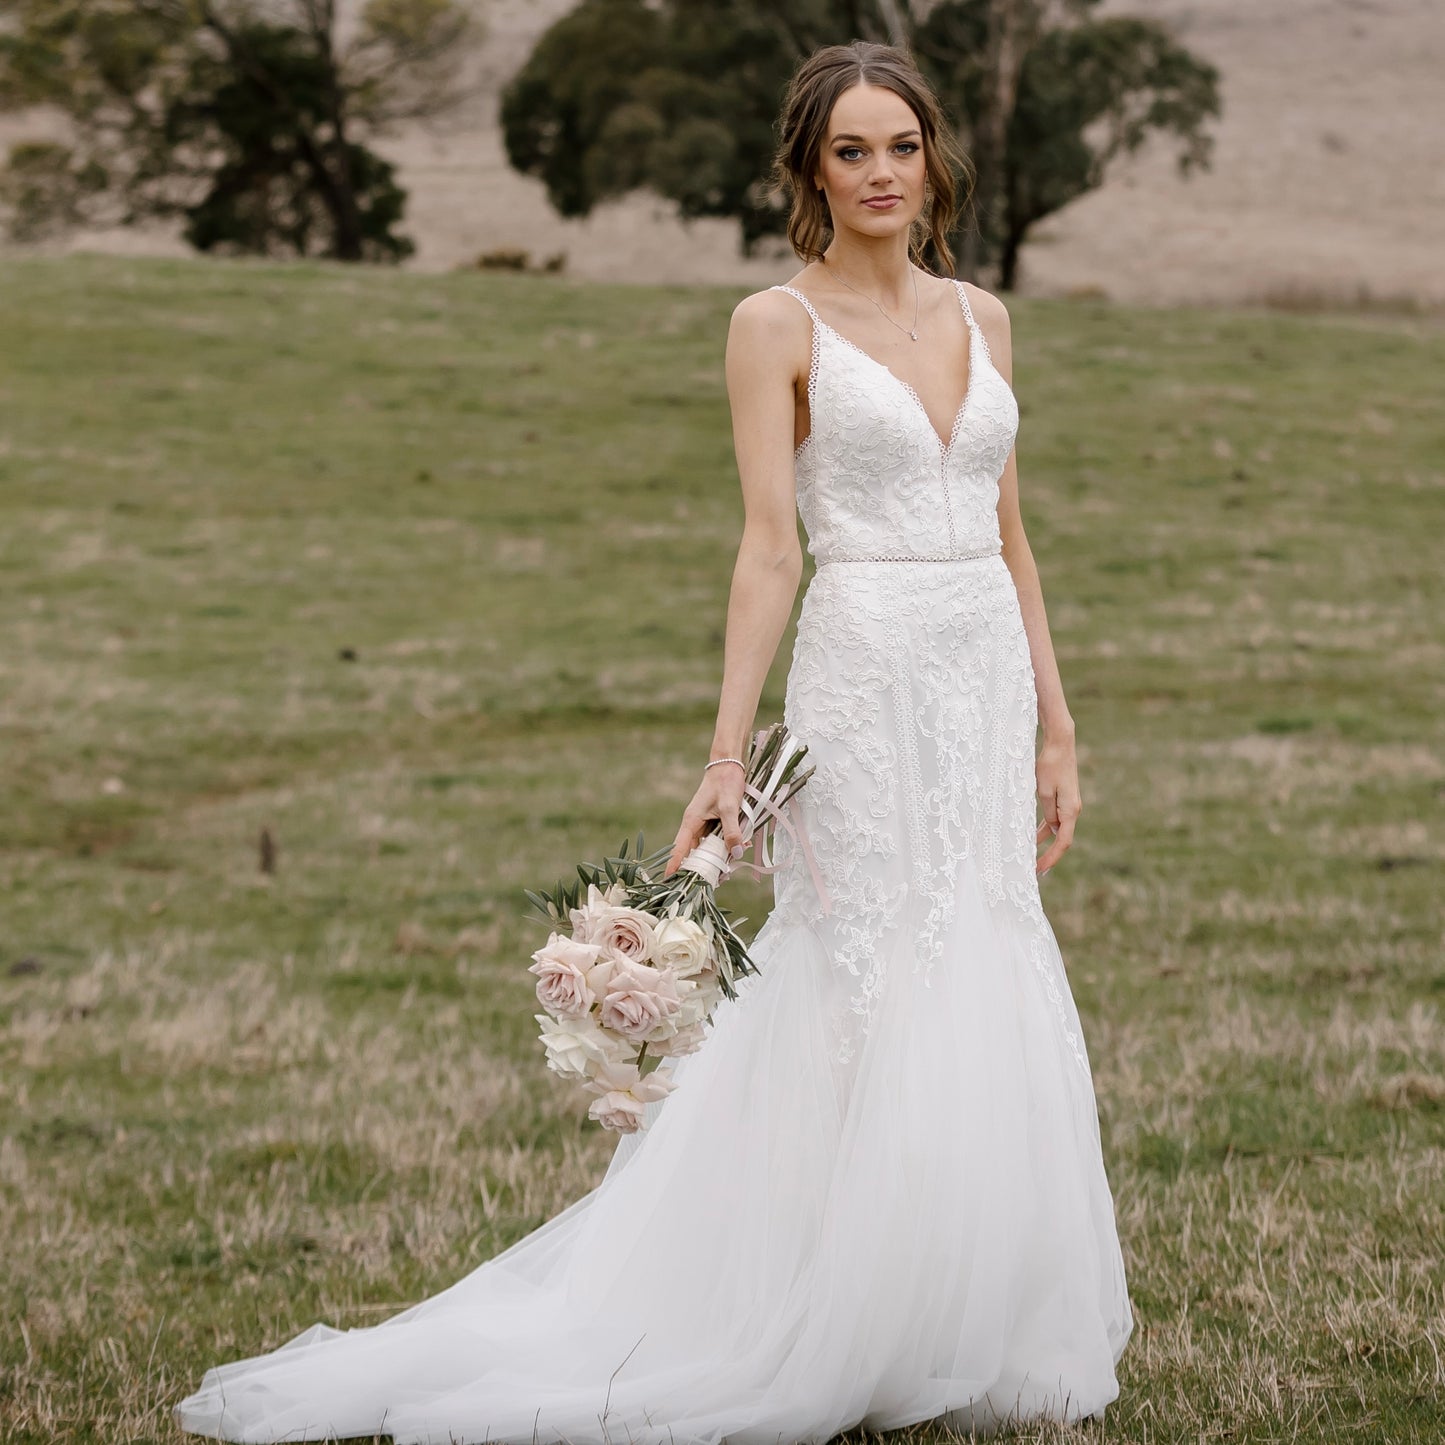 "A captivating and elegant Selena wedding gown, featuring a Boho-inspired design. The dress showcases a flattering V-neckline with delicate lace trim, intricate lace detailing throughout, and a fit and flare silhouette that accentuates the wearer's curves. The gown is completed with a chapel train and lace trim on the waist, creating a stunning bridal look."